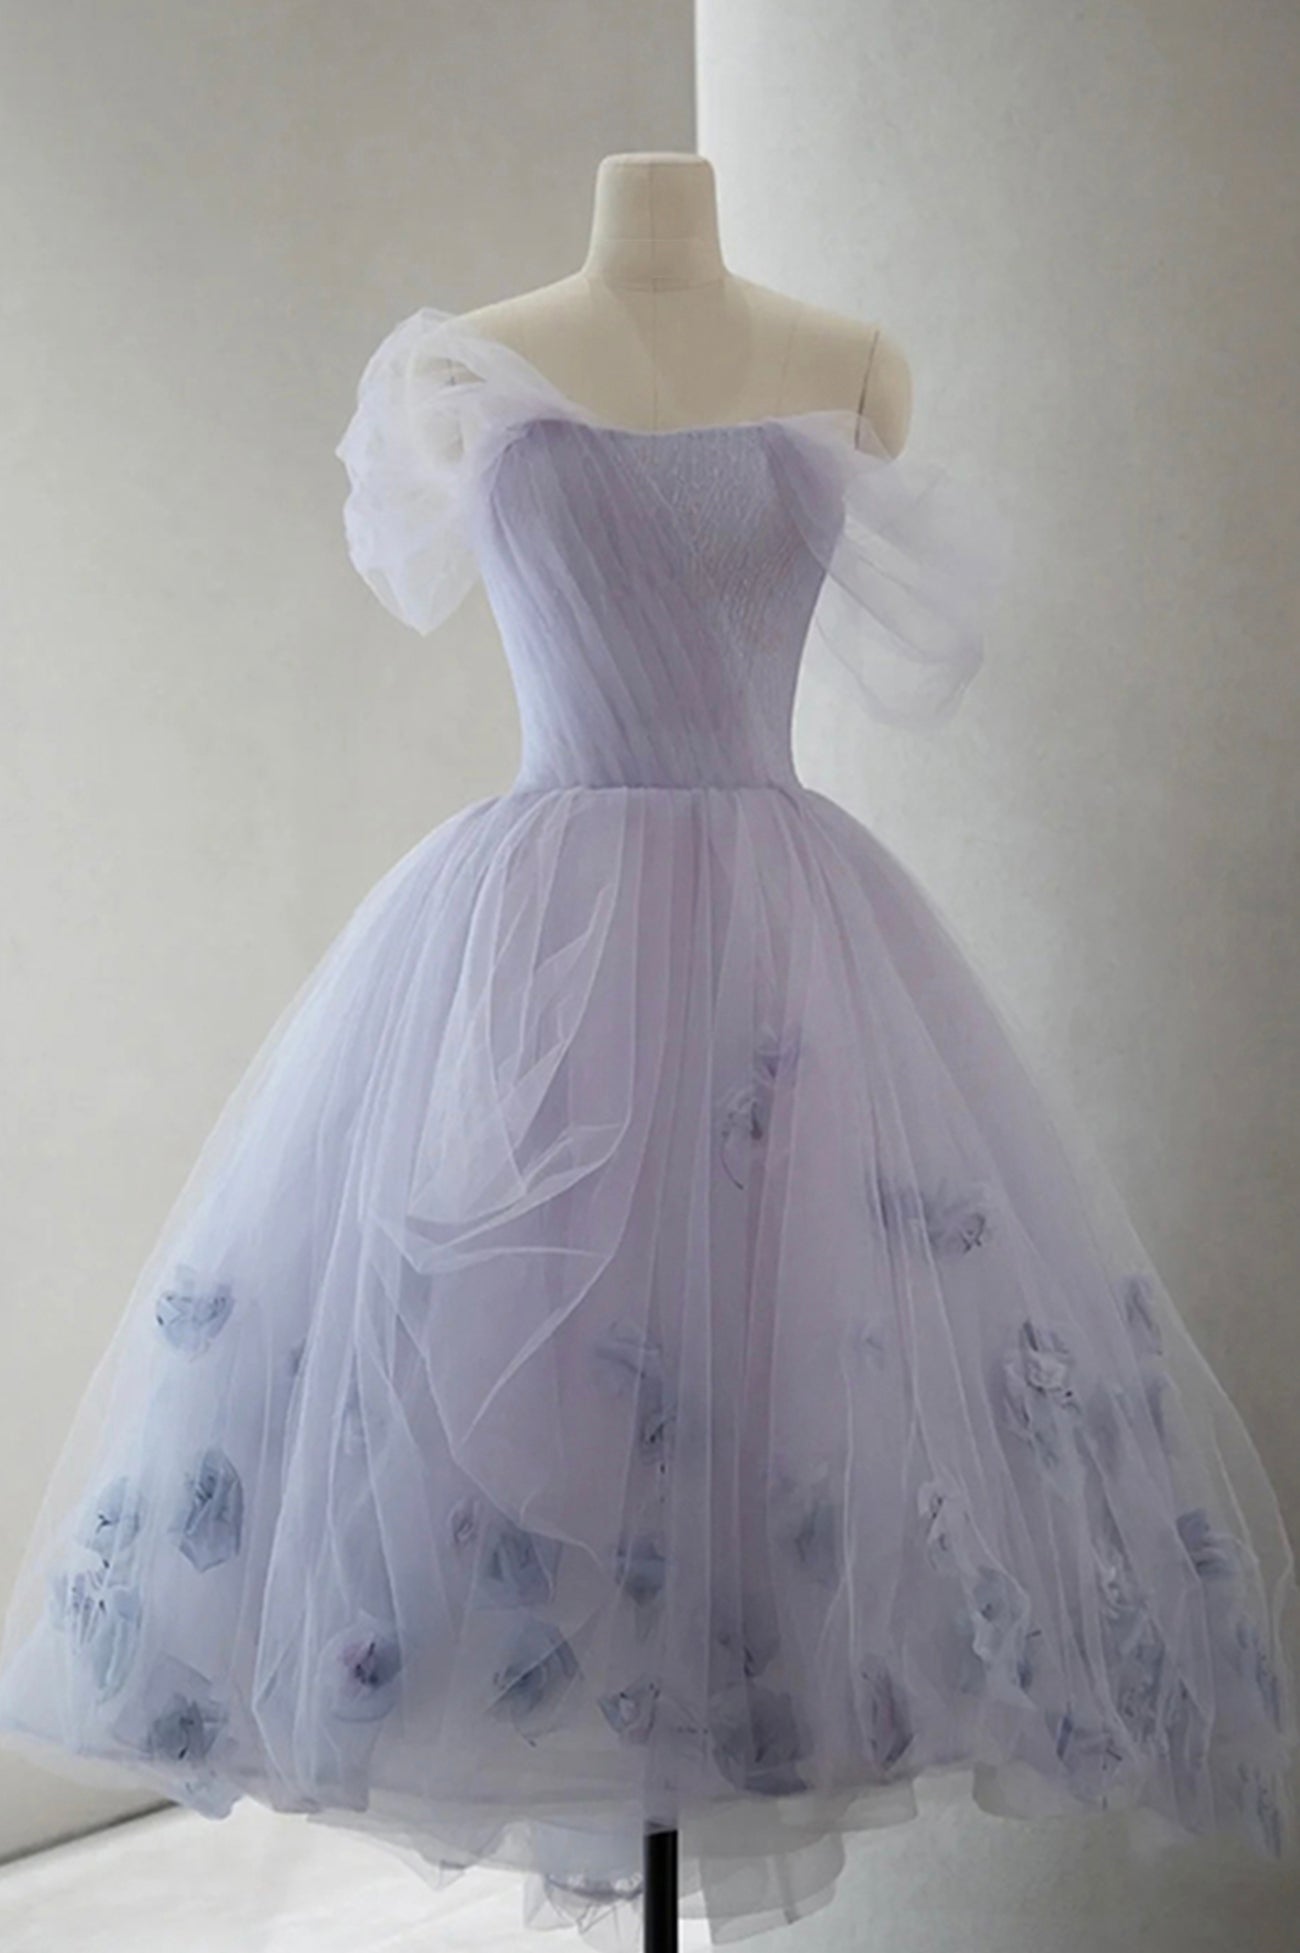 Purple Tulle Short A-Line Prom Dress Outfits For Girls, Cute Off the Shoulder Party Dress